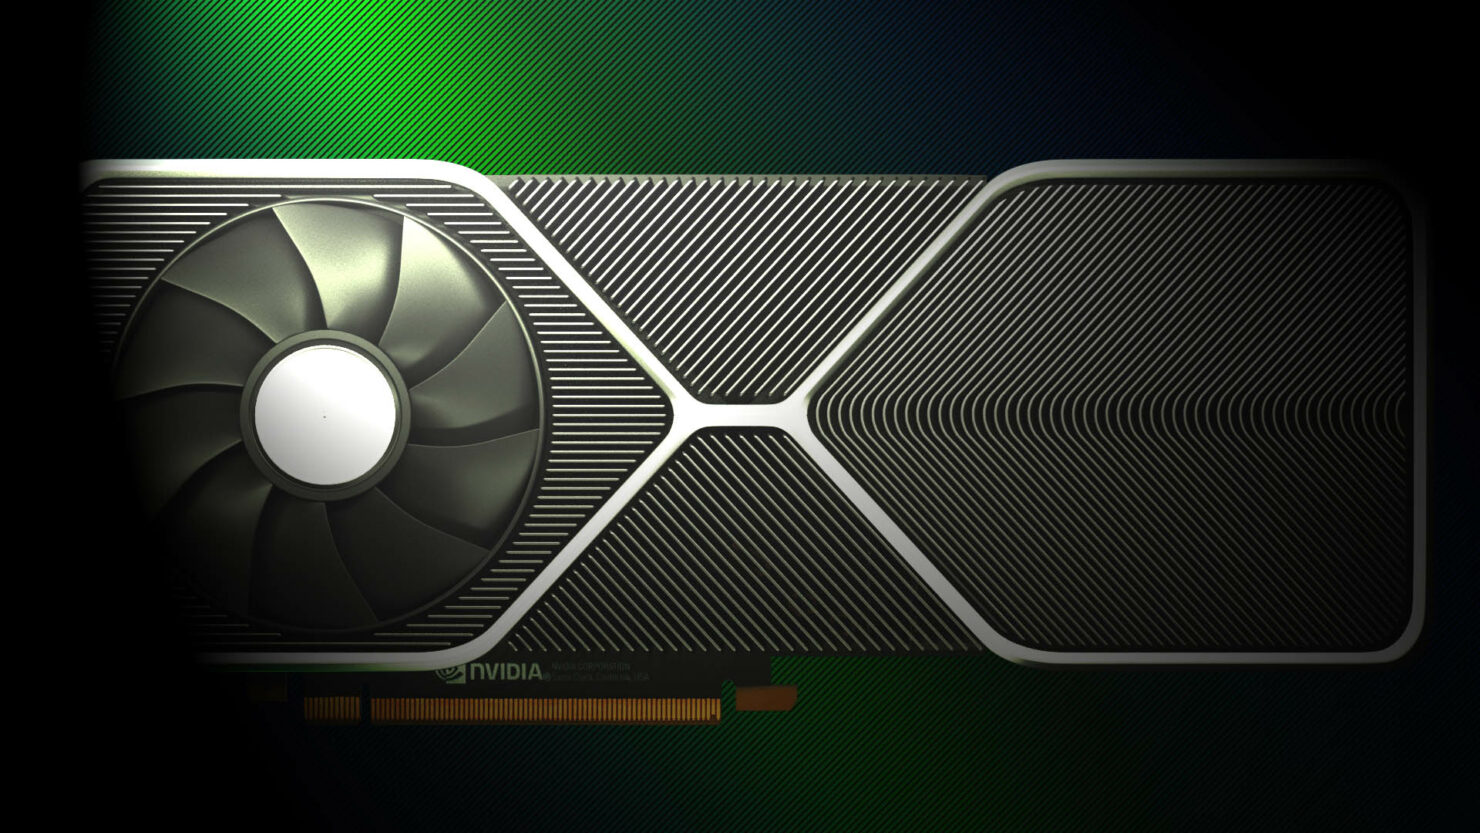 Nvidia Rtx 3090 Rtx 3080 Rtx 3070 Everything You Need To Know About